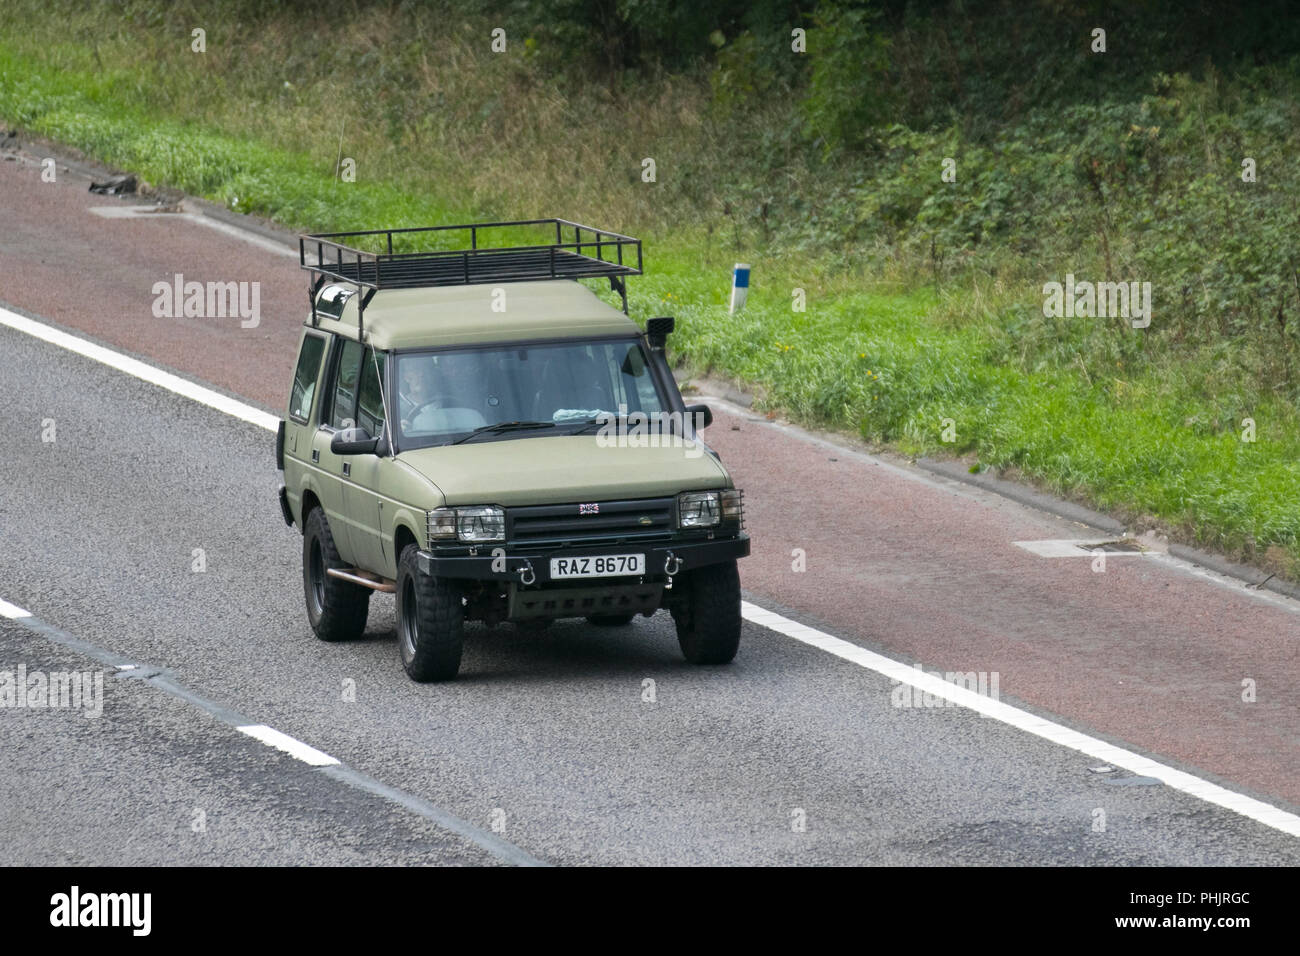 1996 60s sixties Land Rover Discovery TDI 1996 Diesel Hardtop Land Rover with snorkel exhaust, rugged leisure, off-road vehicle, UK Stock Photo